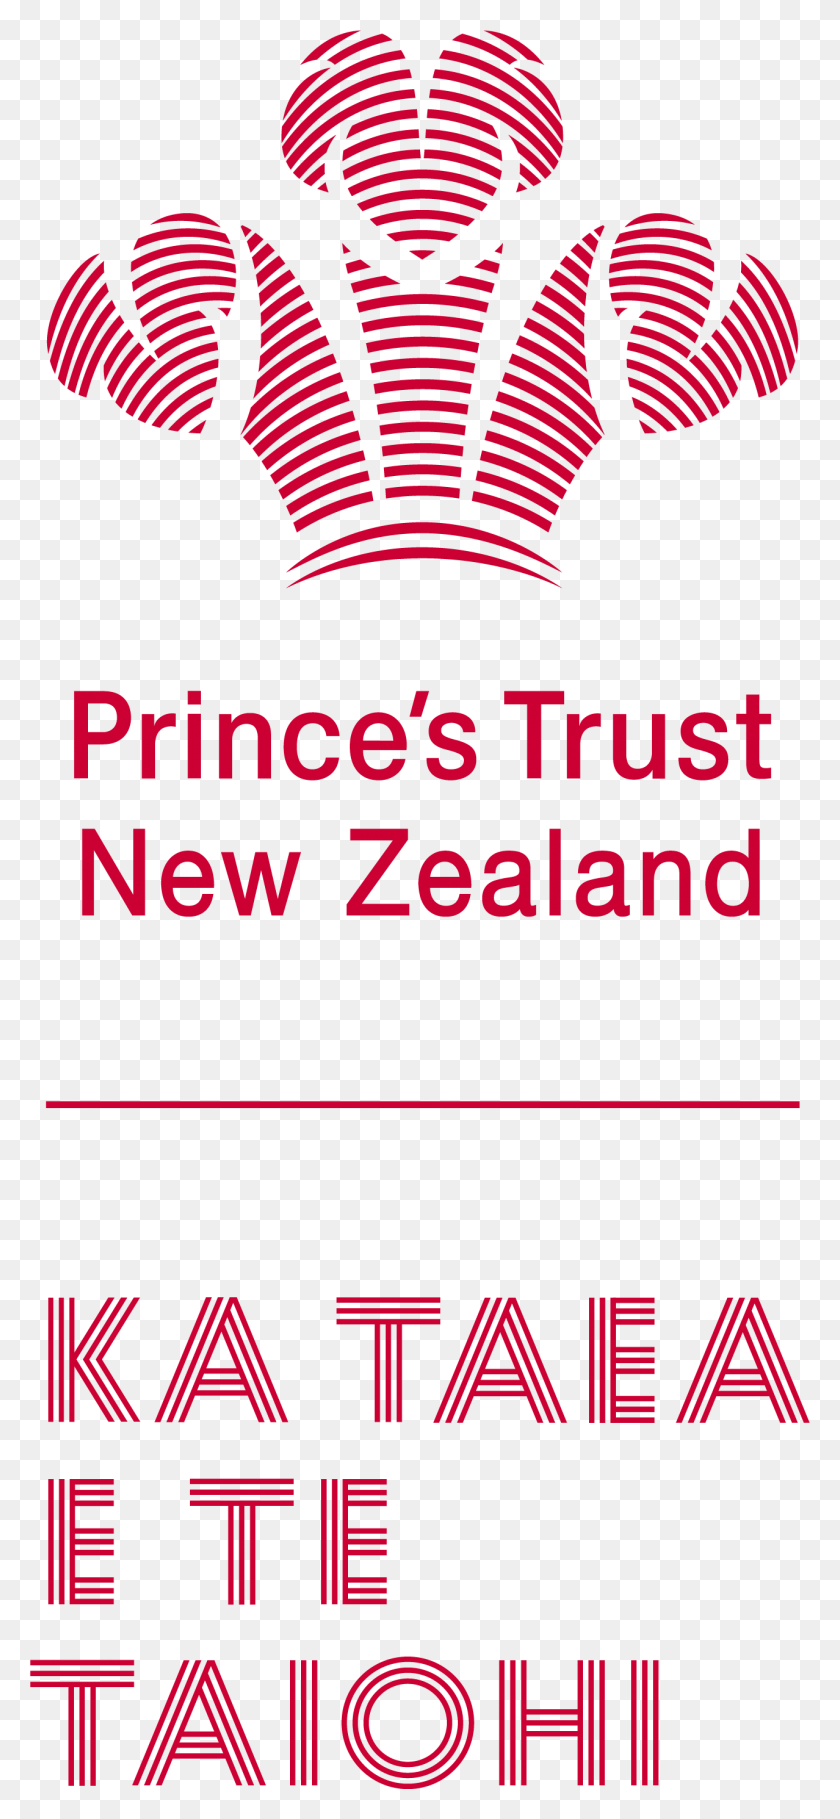 1278x2883 Descargar Png Ycdi Nz Maori Logo Rgb Stack 3Lines Primary Prince39S Trust, Persona, Humano, Correo Aéreo Hd Png